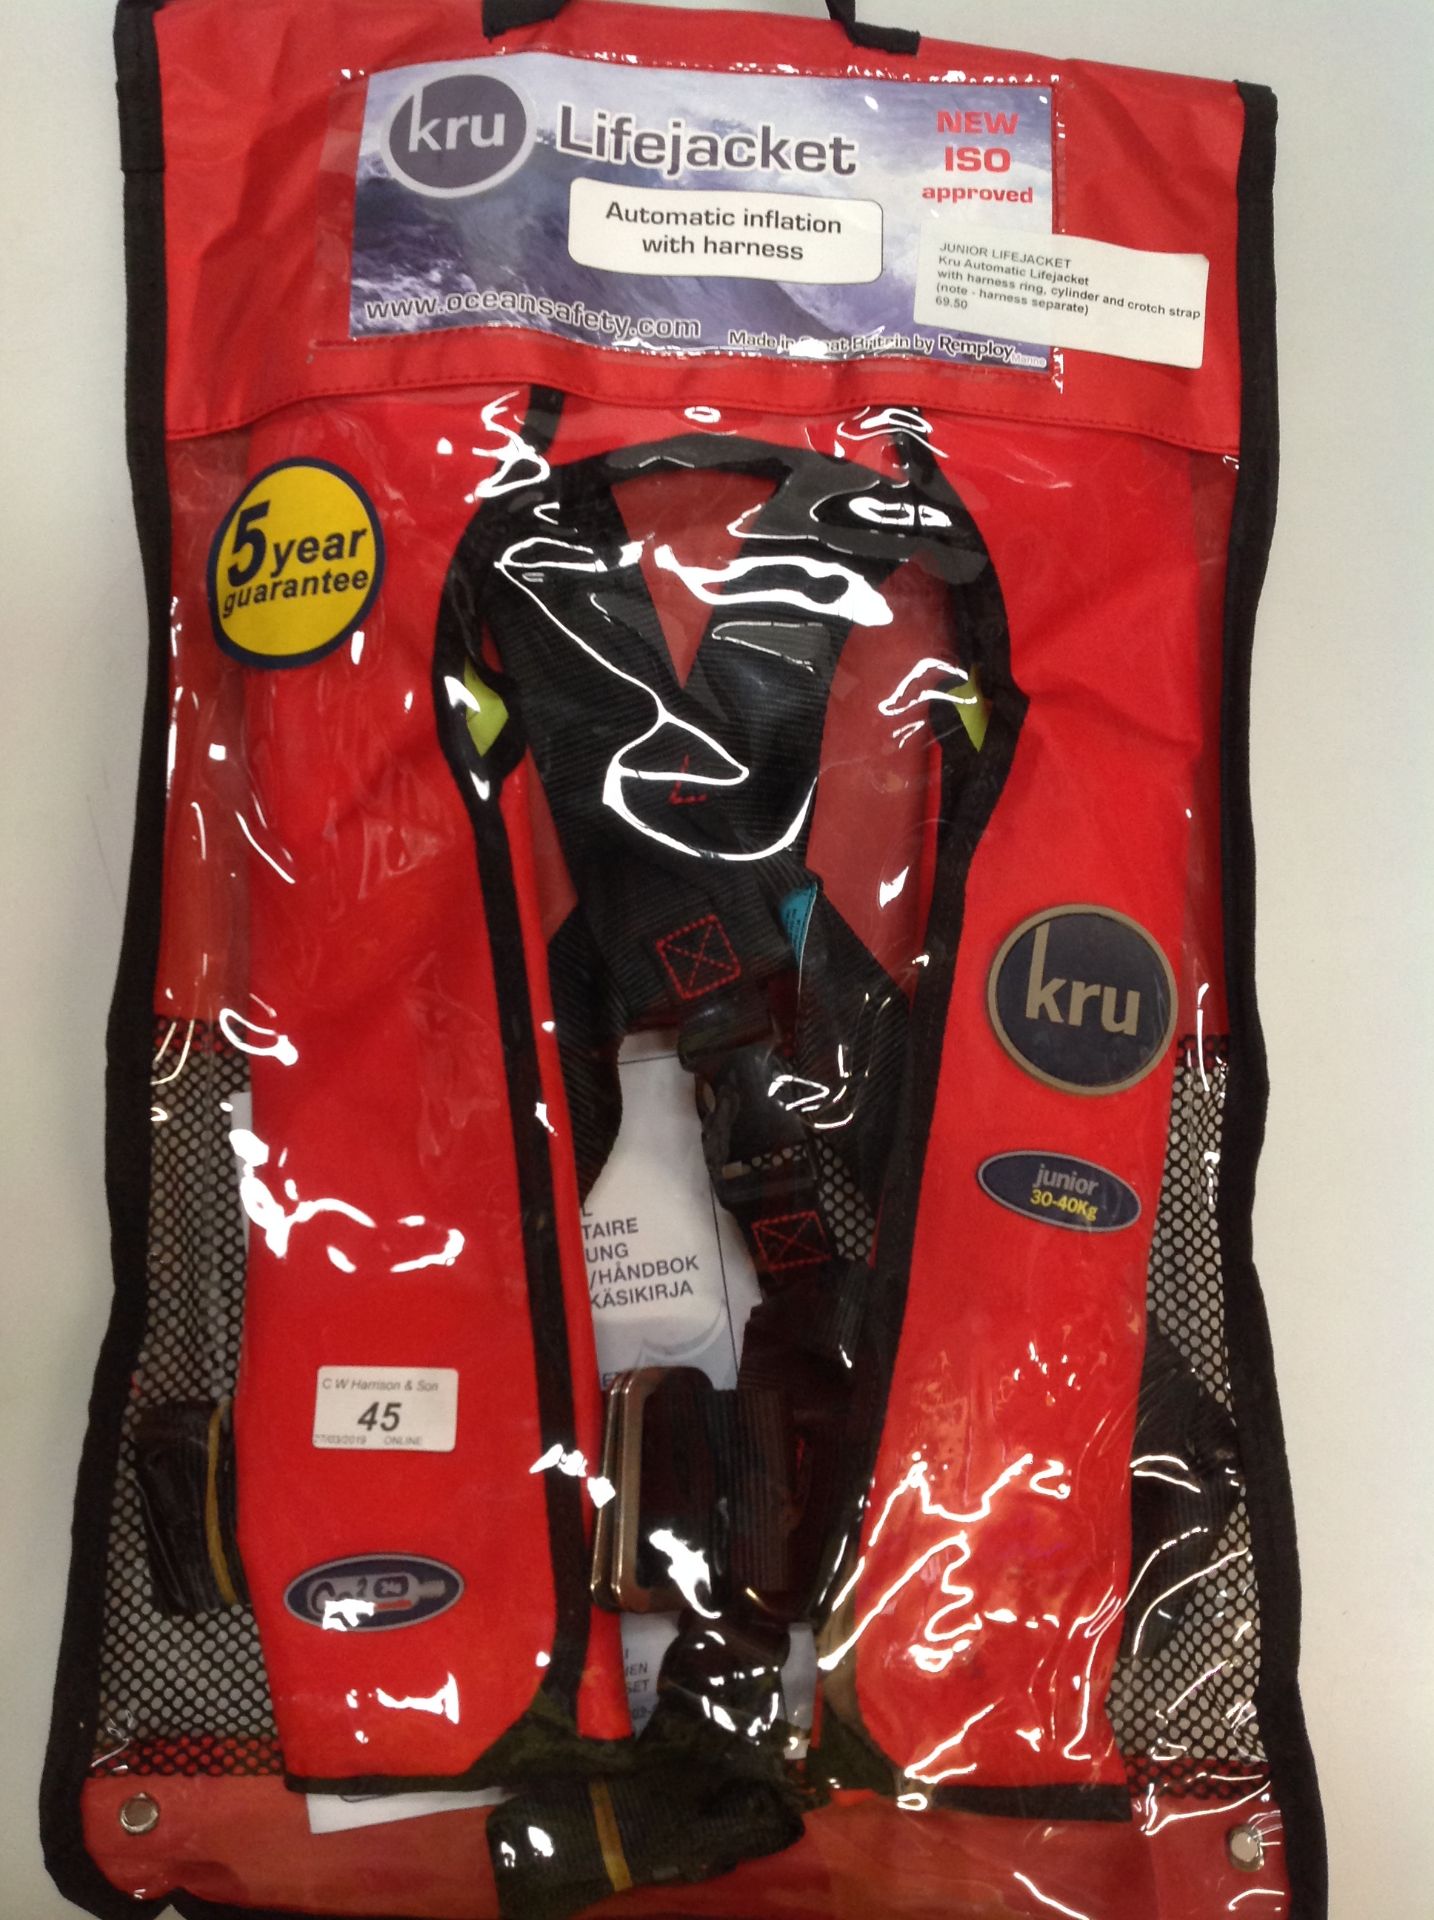 KRU Commodore Junior automatic life jacket with harness